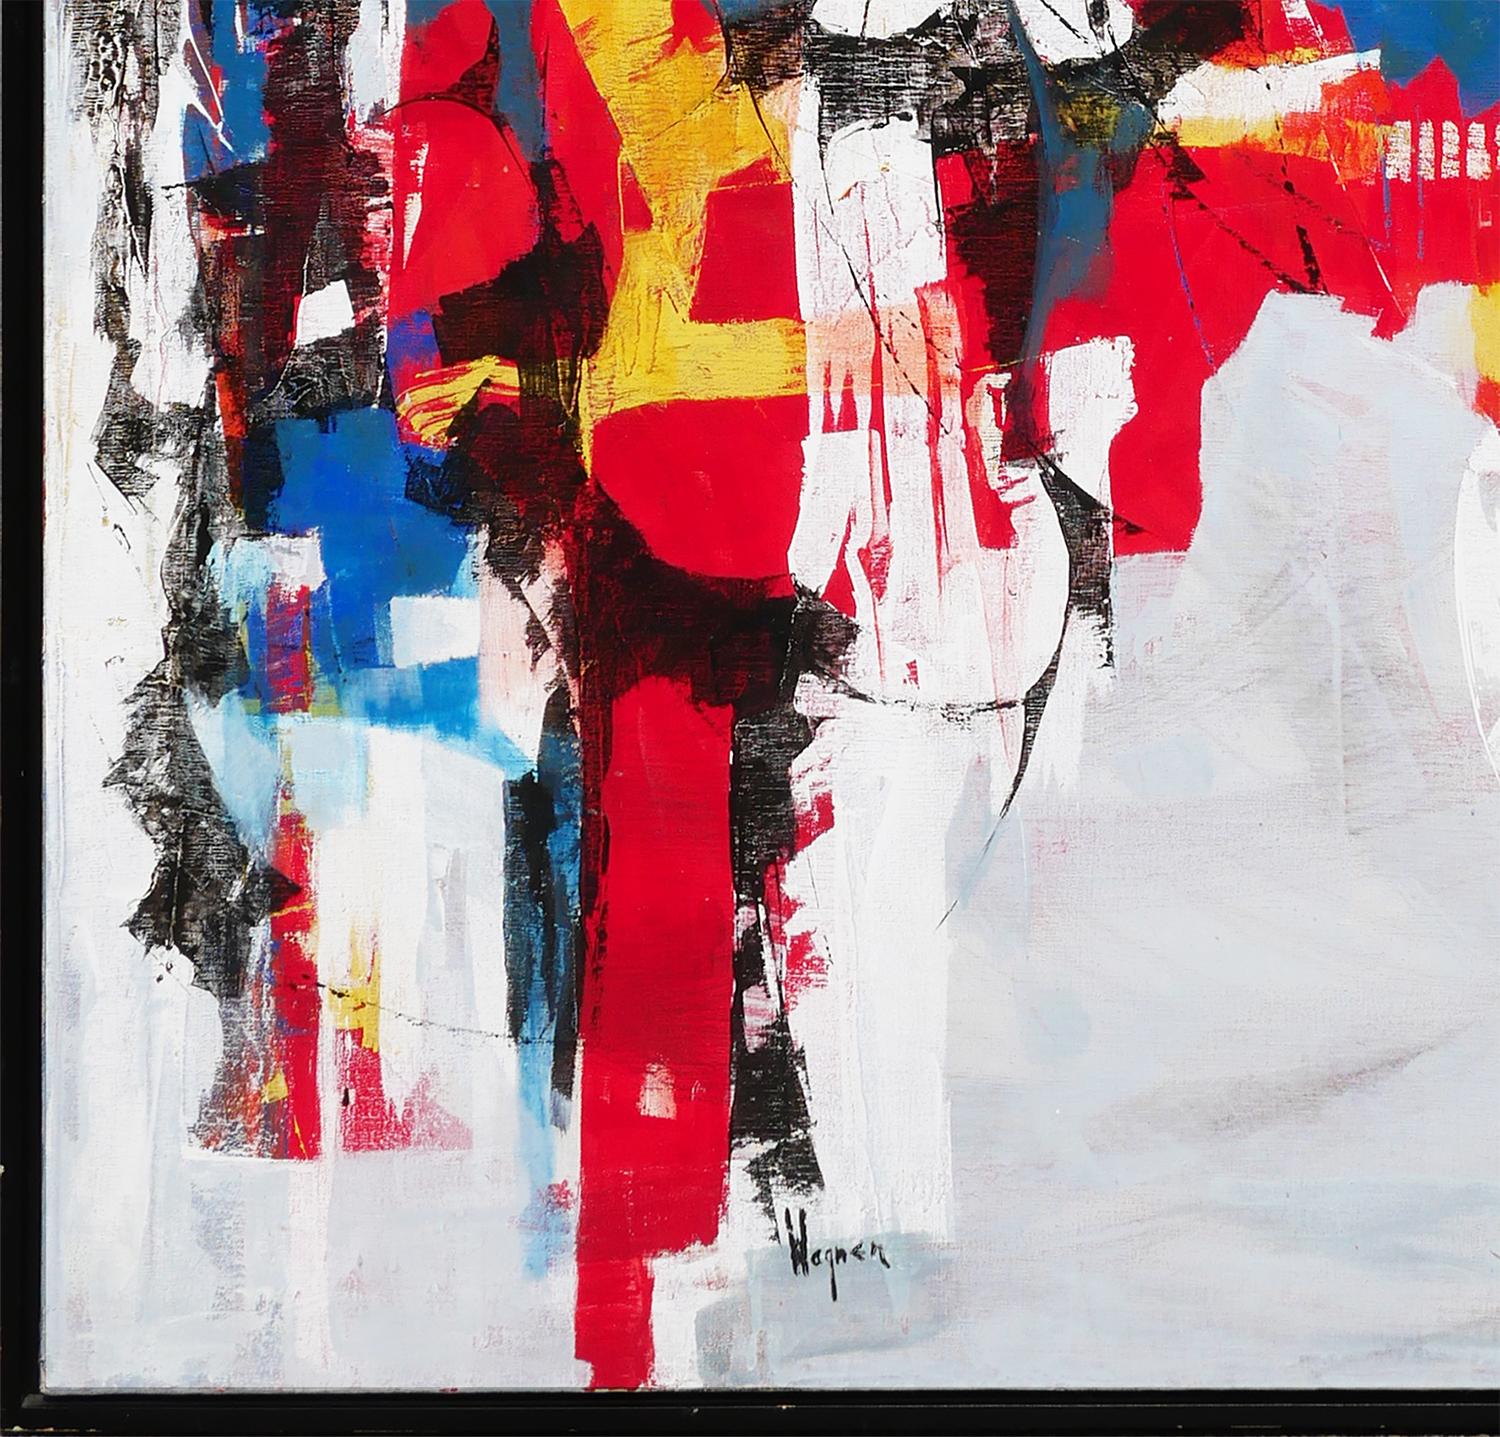 Modern abstract expressionist painting by Californian artist Gordon Wagner. The work features a colorful composition of overlapping areas of bright blue, red, and yellow tied together with black and white accents. Signed by the artist along the